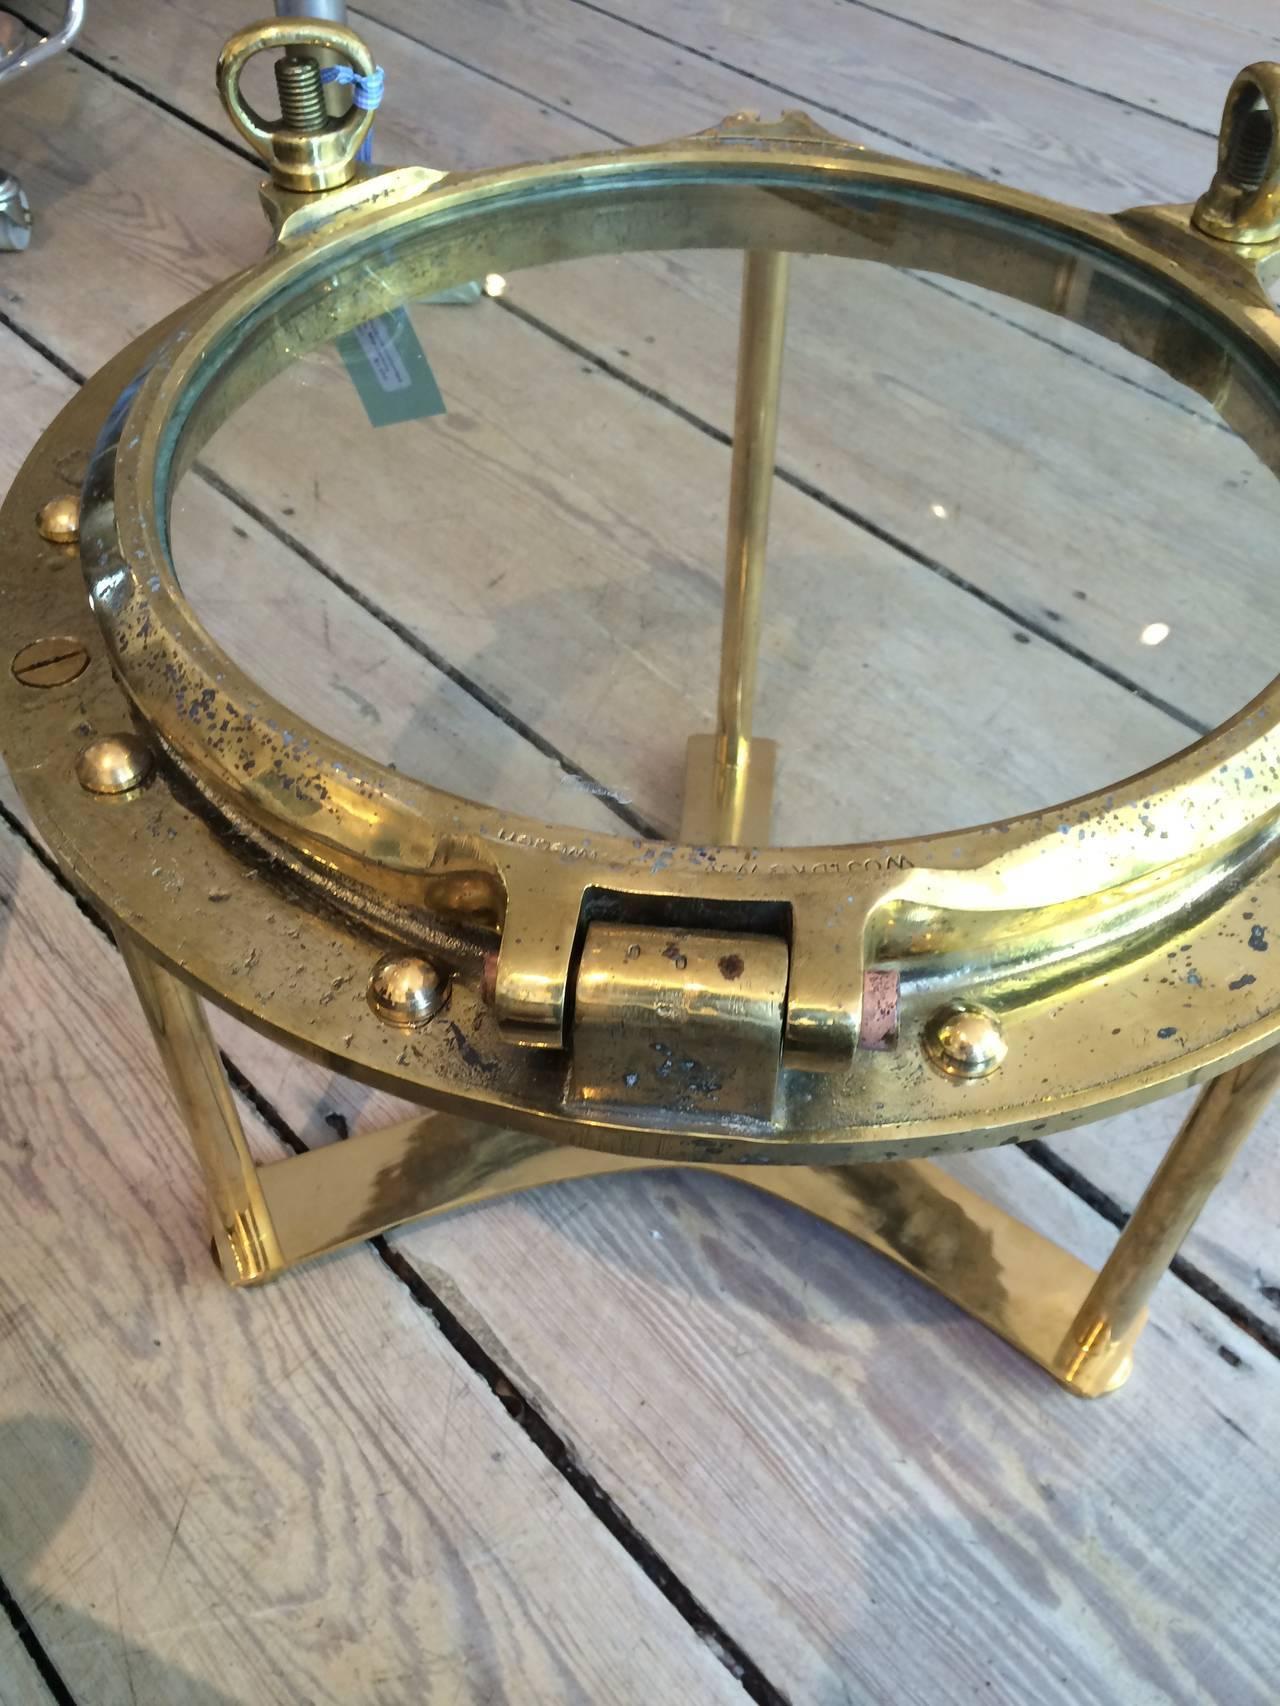 Solid brass working porthole window from a decommissioned ship with great patina. This has been polished, the rivets put back in and a table base designed by us to disassemble if needed. I'll be honest, it's heavy. Use as a side or coffee table,